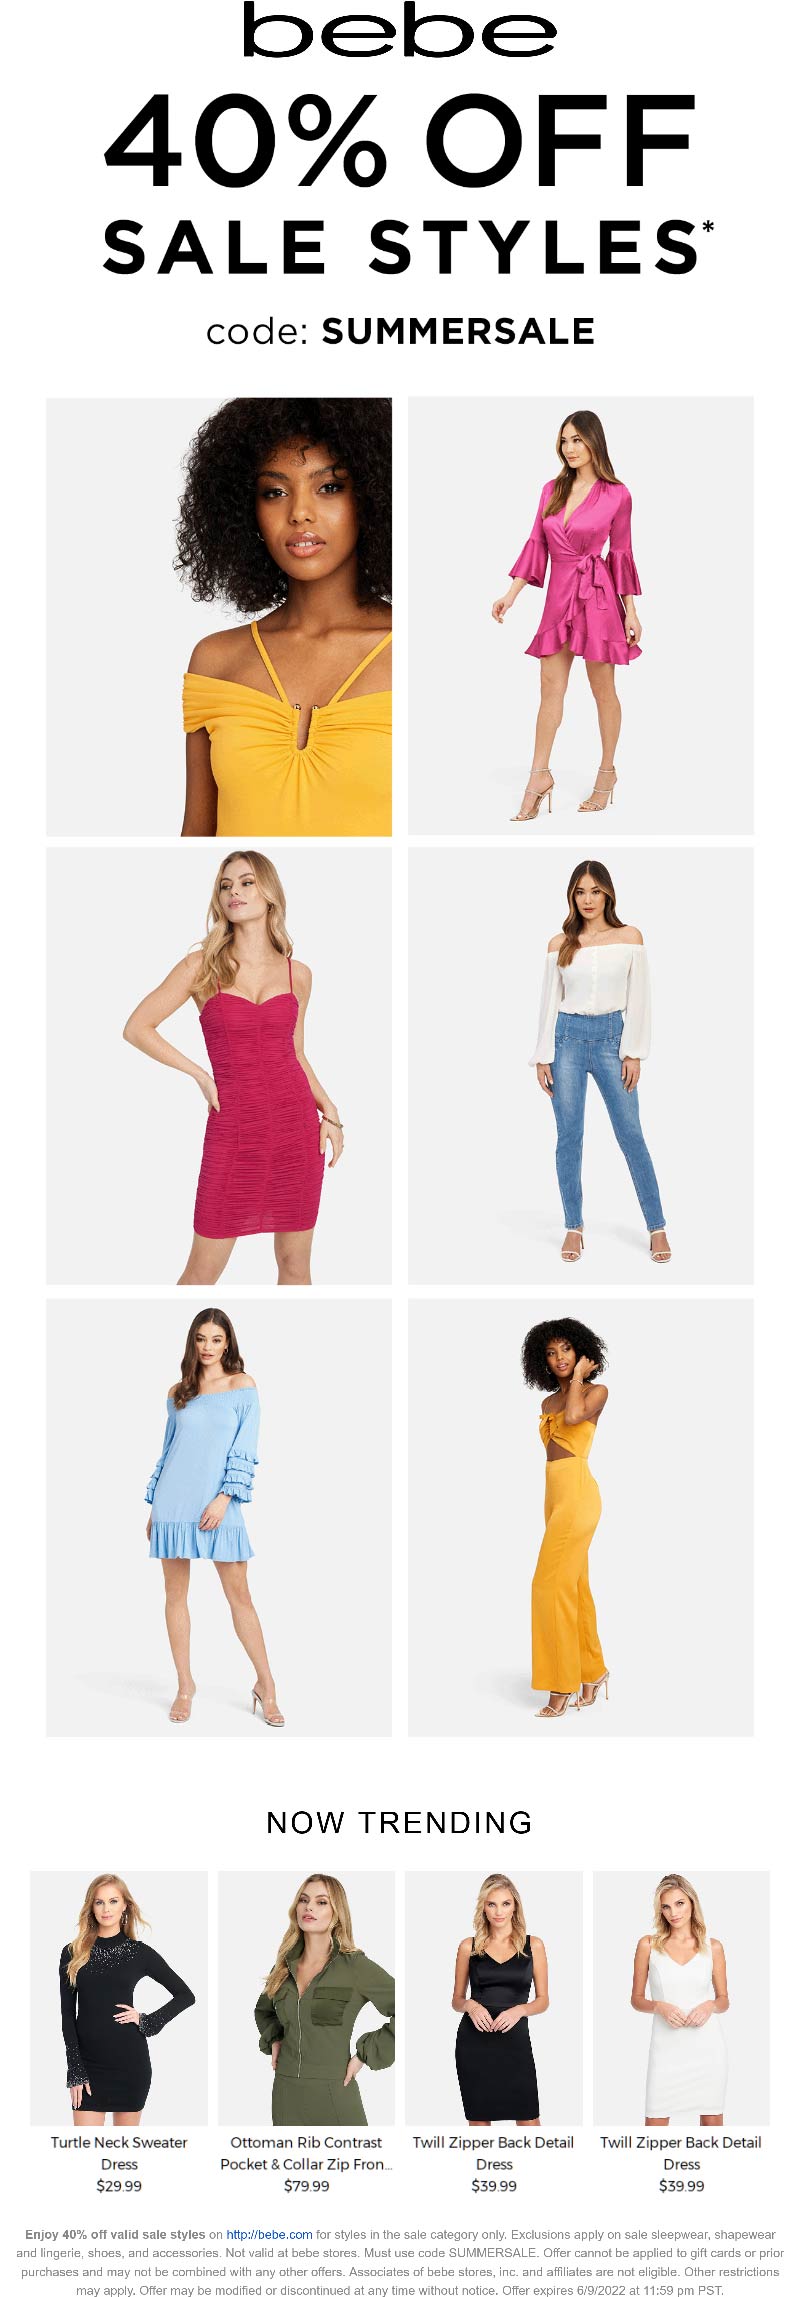 bebe stores Coupon  Extra 40% off sale styles online at bebe via promo code SUMMERSALE #bebe 